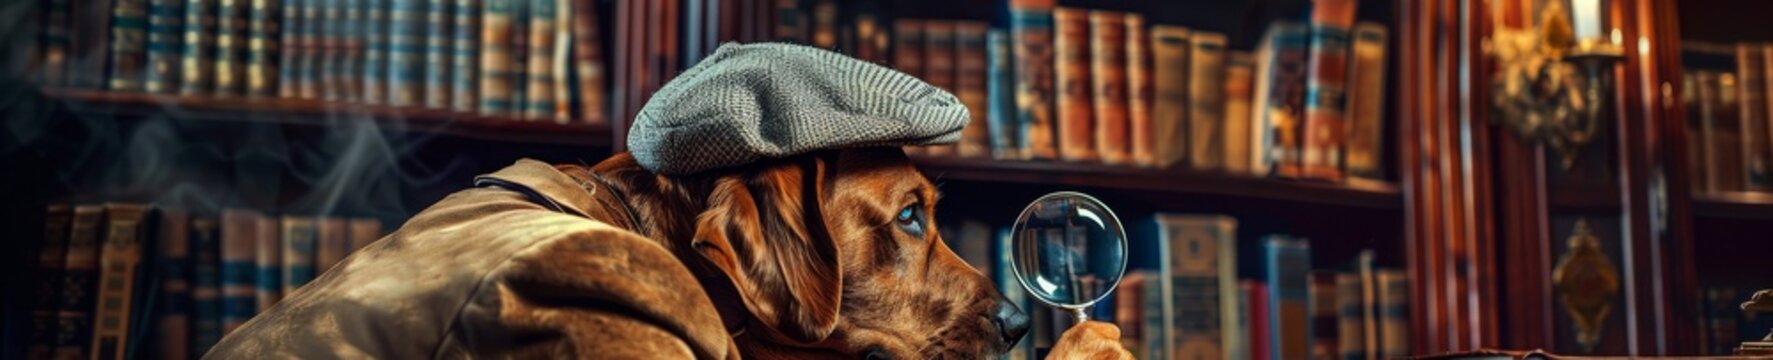 A detective dog with a magnifying glass sniffing clues in an old fashioned office wearing a Sherlock Holmes hat